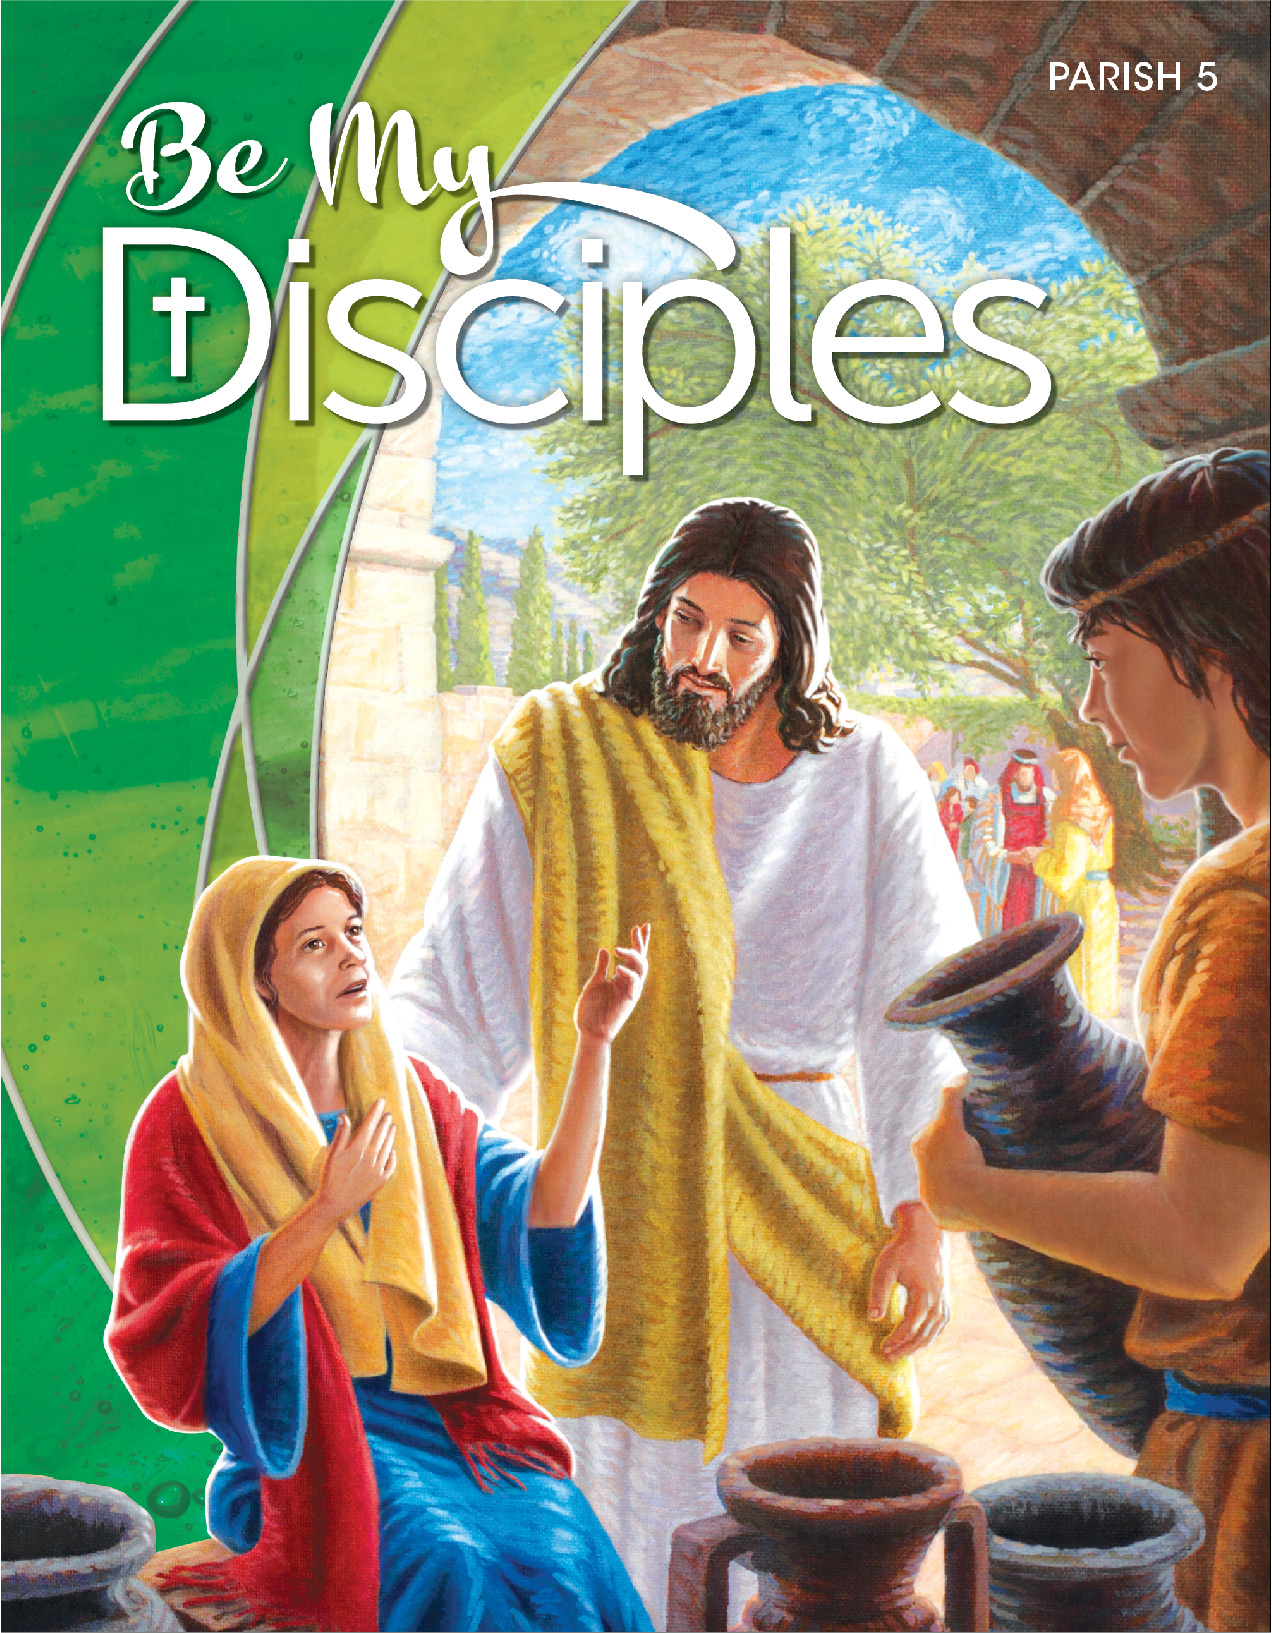 Book cover of Be My Disciples with Jesus visiting a woman and a boy